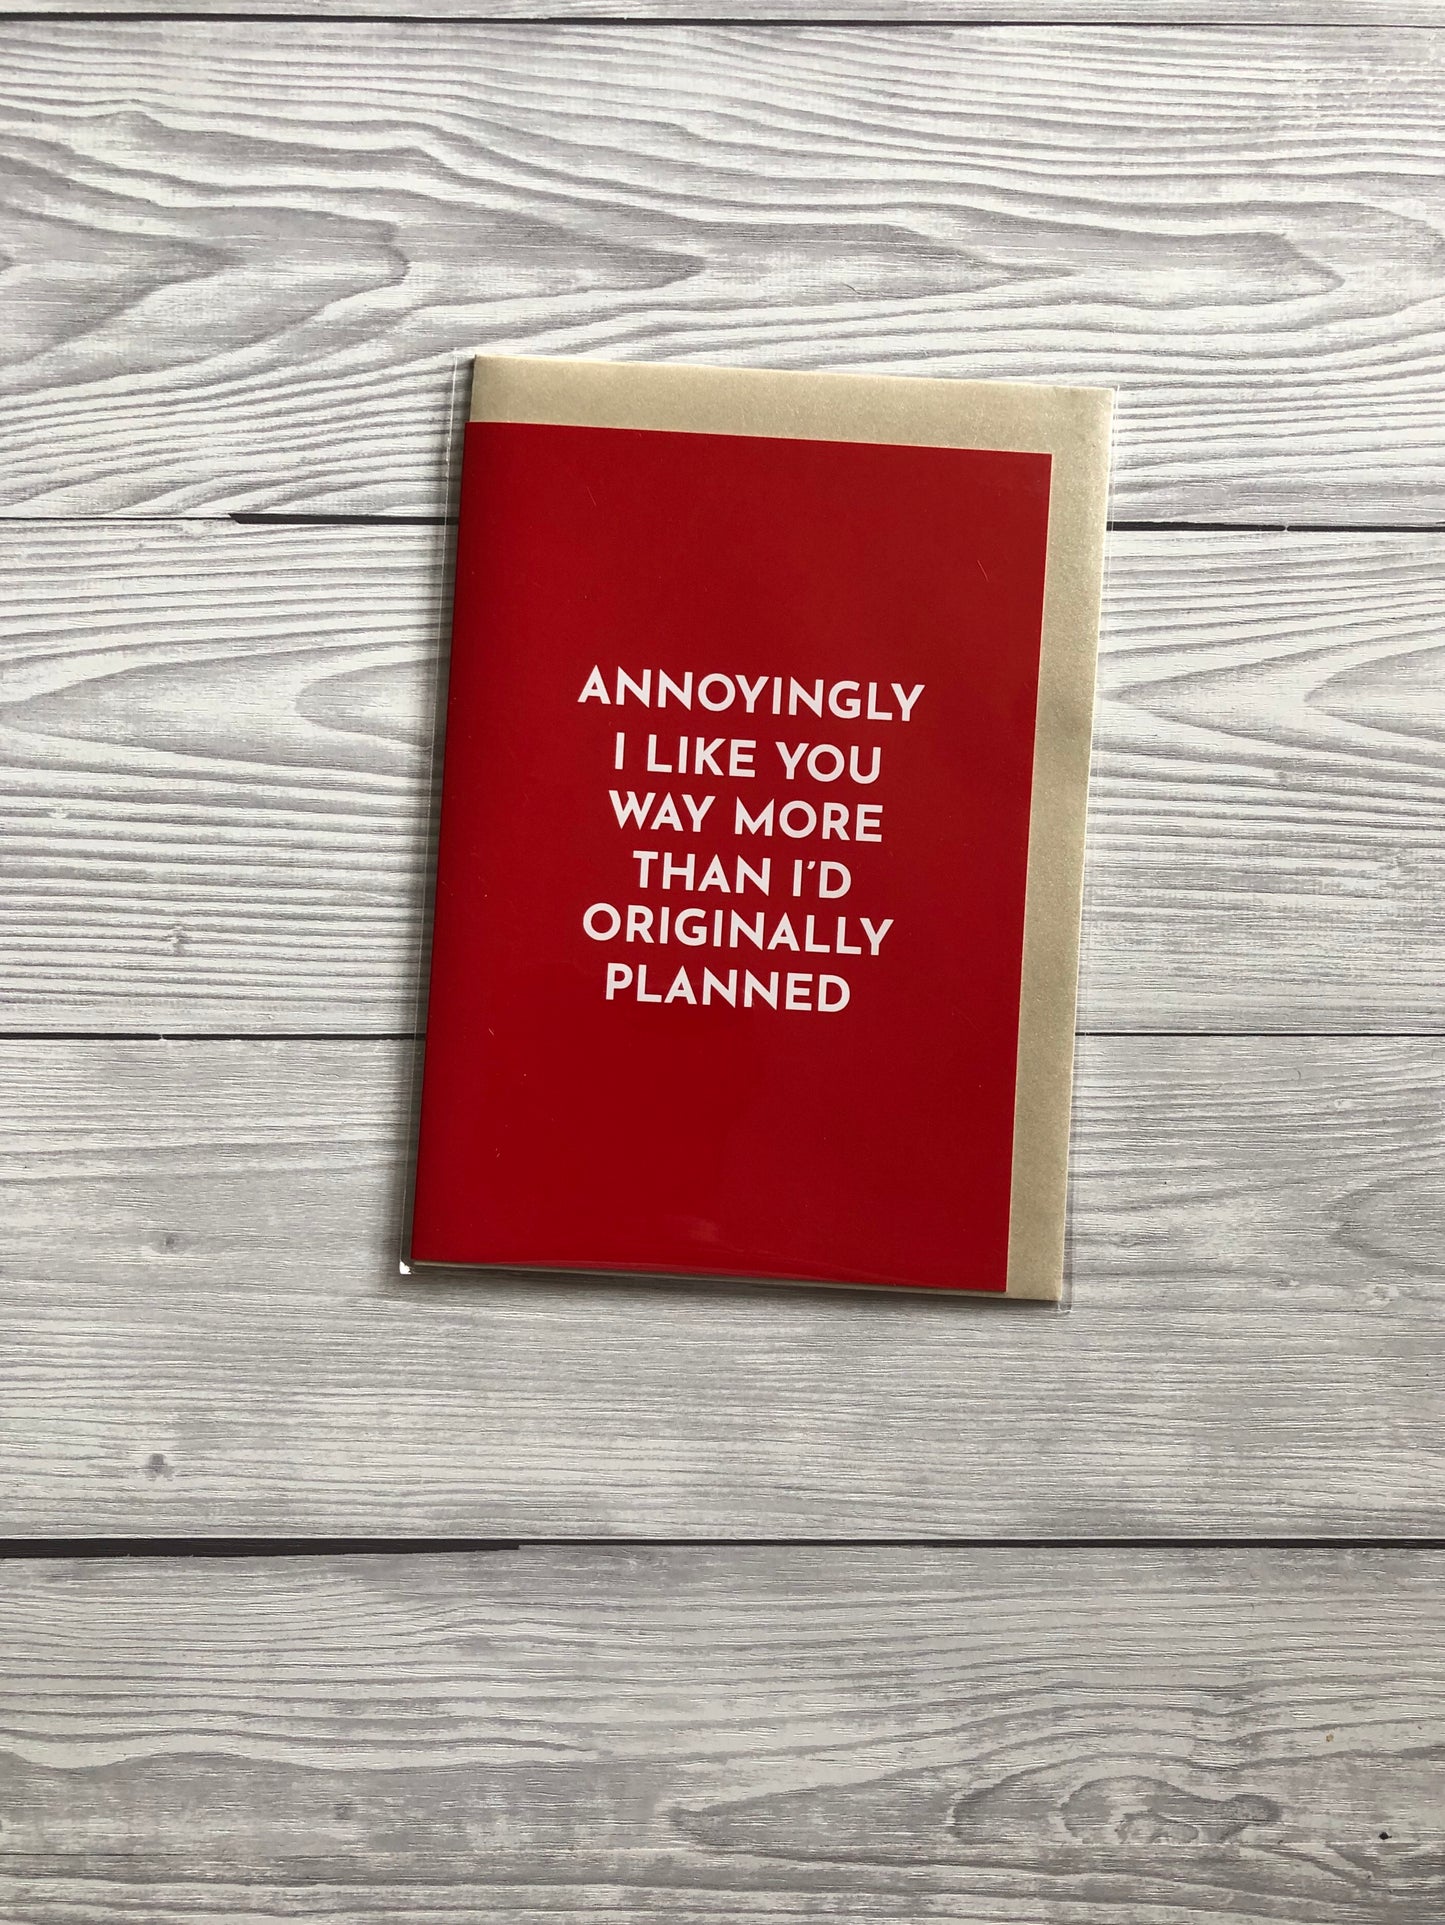 Annoyingly I like you way more then I planned  Funny romantic inappropriate gift card auckland, NZmade by nofilterco Lisa Stirling 